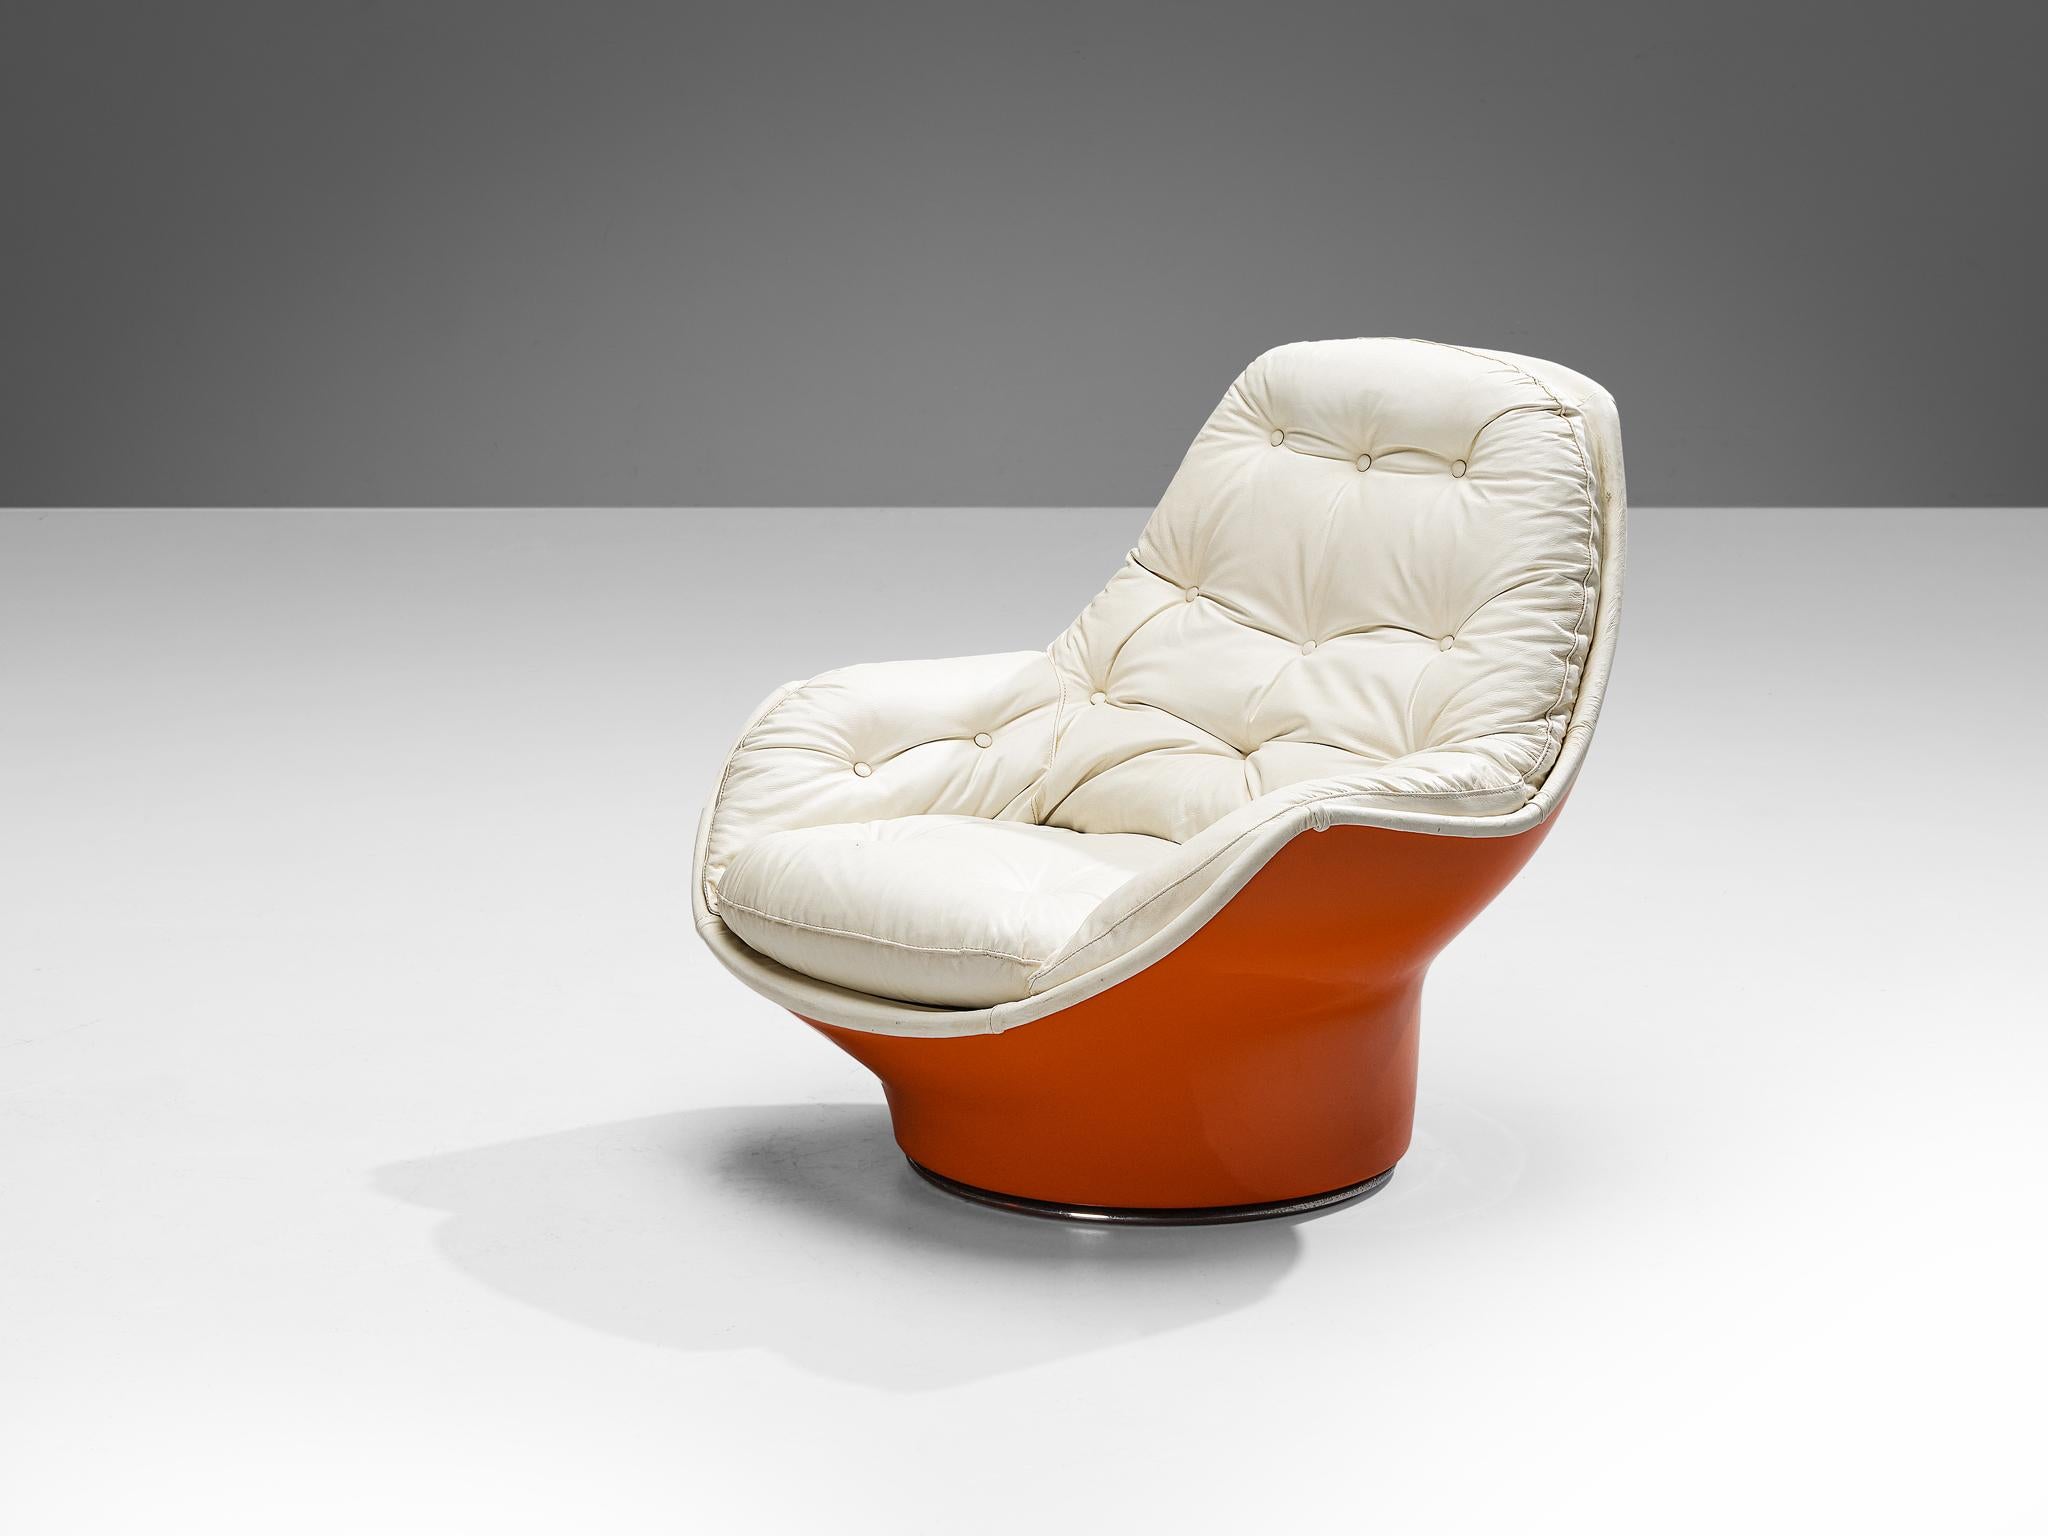 Michel Cadestin for Airborne, 'Yoga' lounge chair, fiberglass, padded leather, steel, France, 1970s

A remarkable lounge chair designed by Michel Cadestin for Airborne in the 1970s. This lounge chair, model 'Yoga', is easily recognized as a design